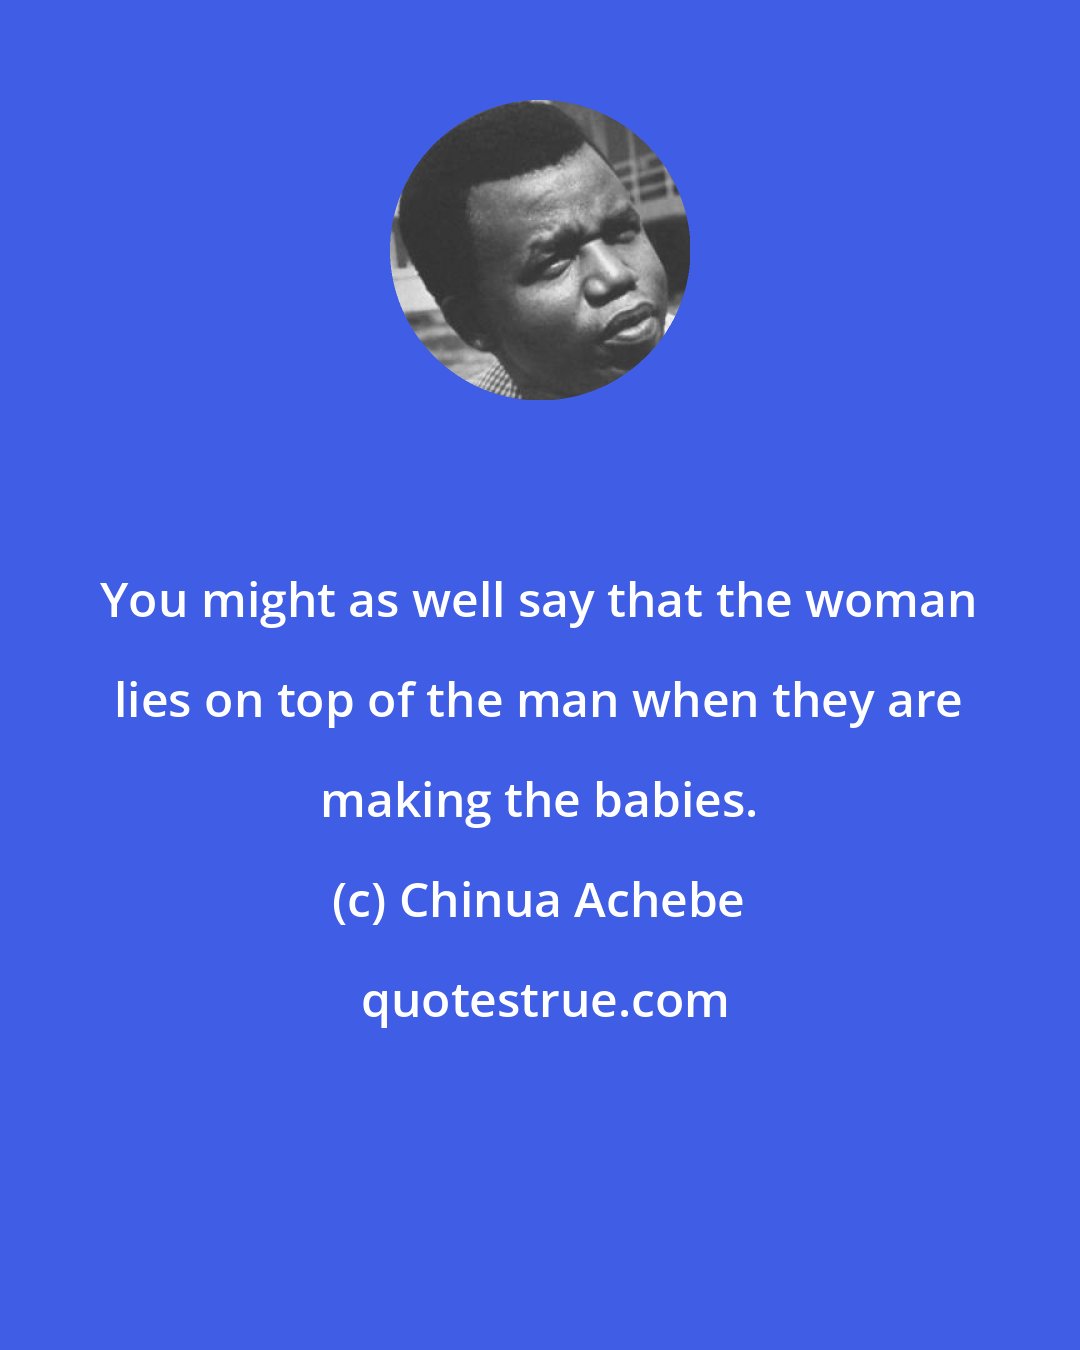 Chinua Achebe: You might as well say that the woman lies on top of the man when they are making the babies.